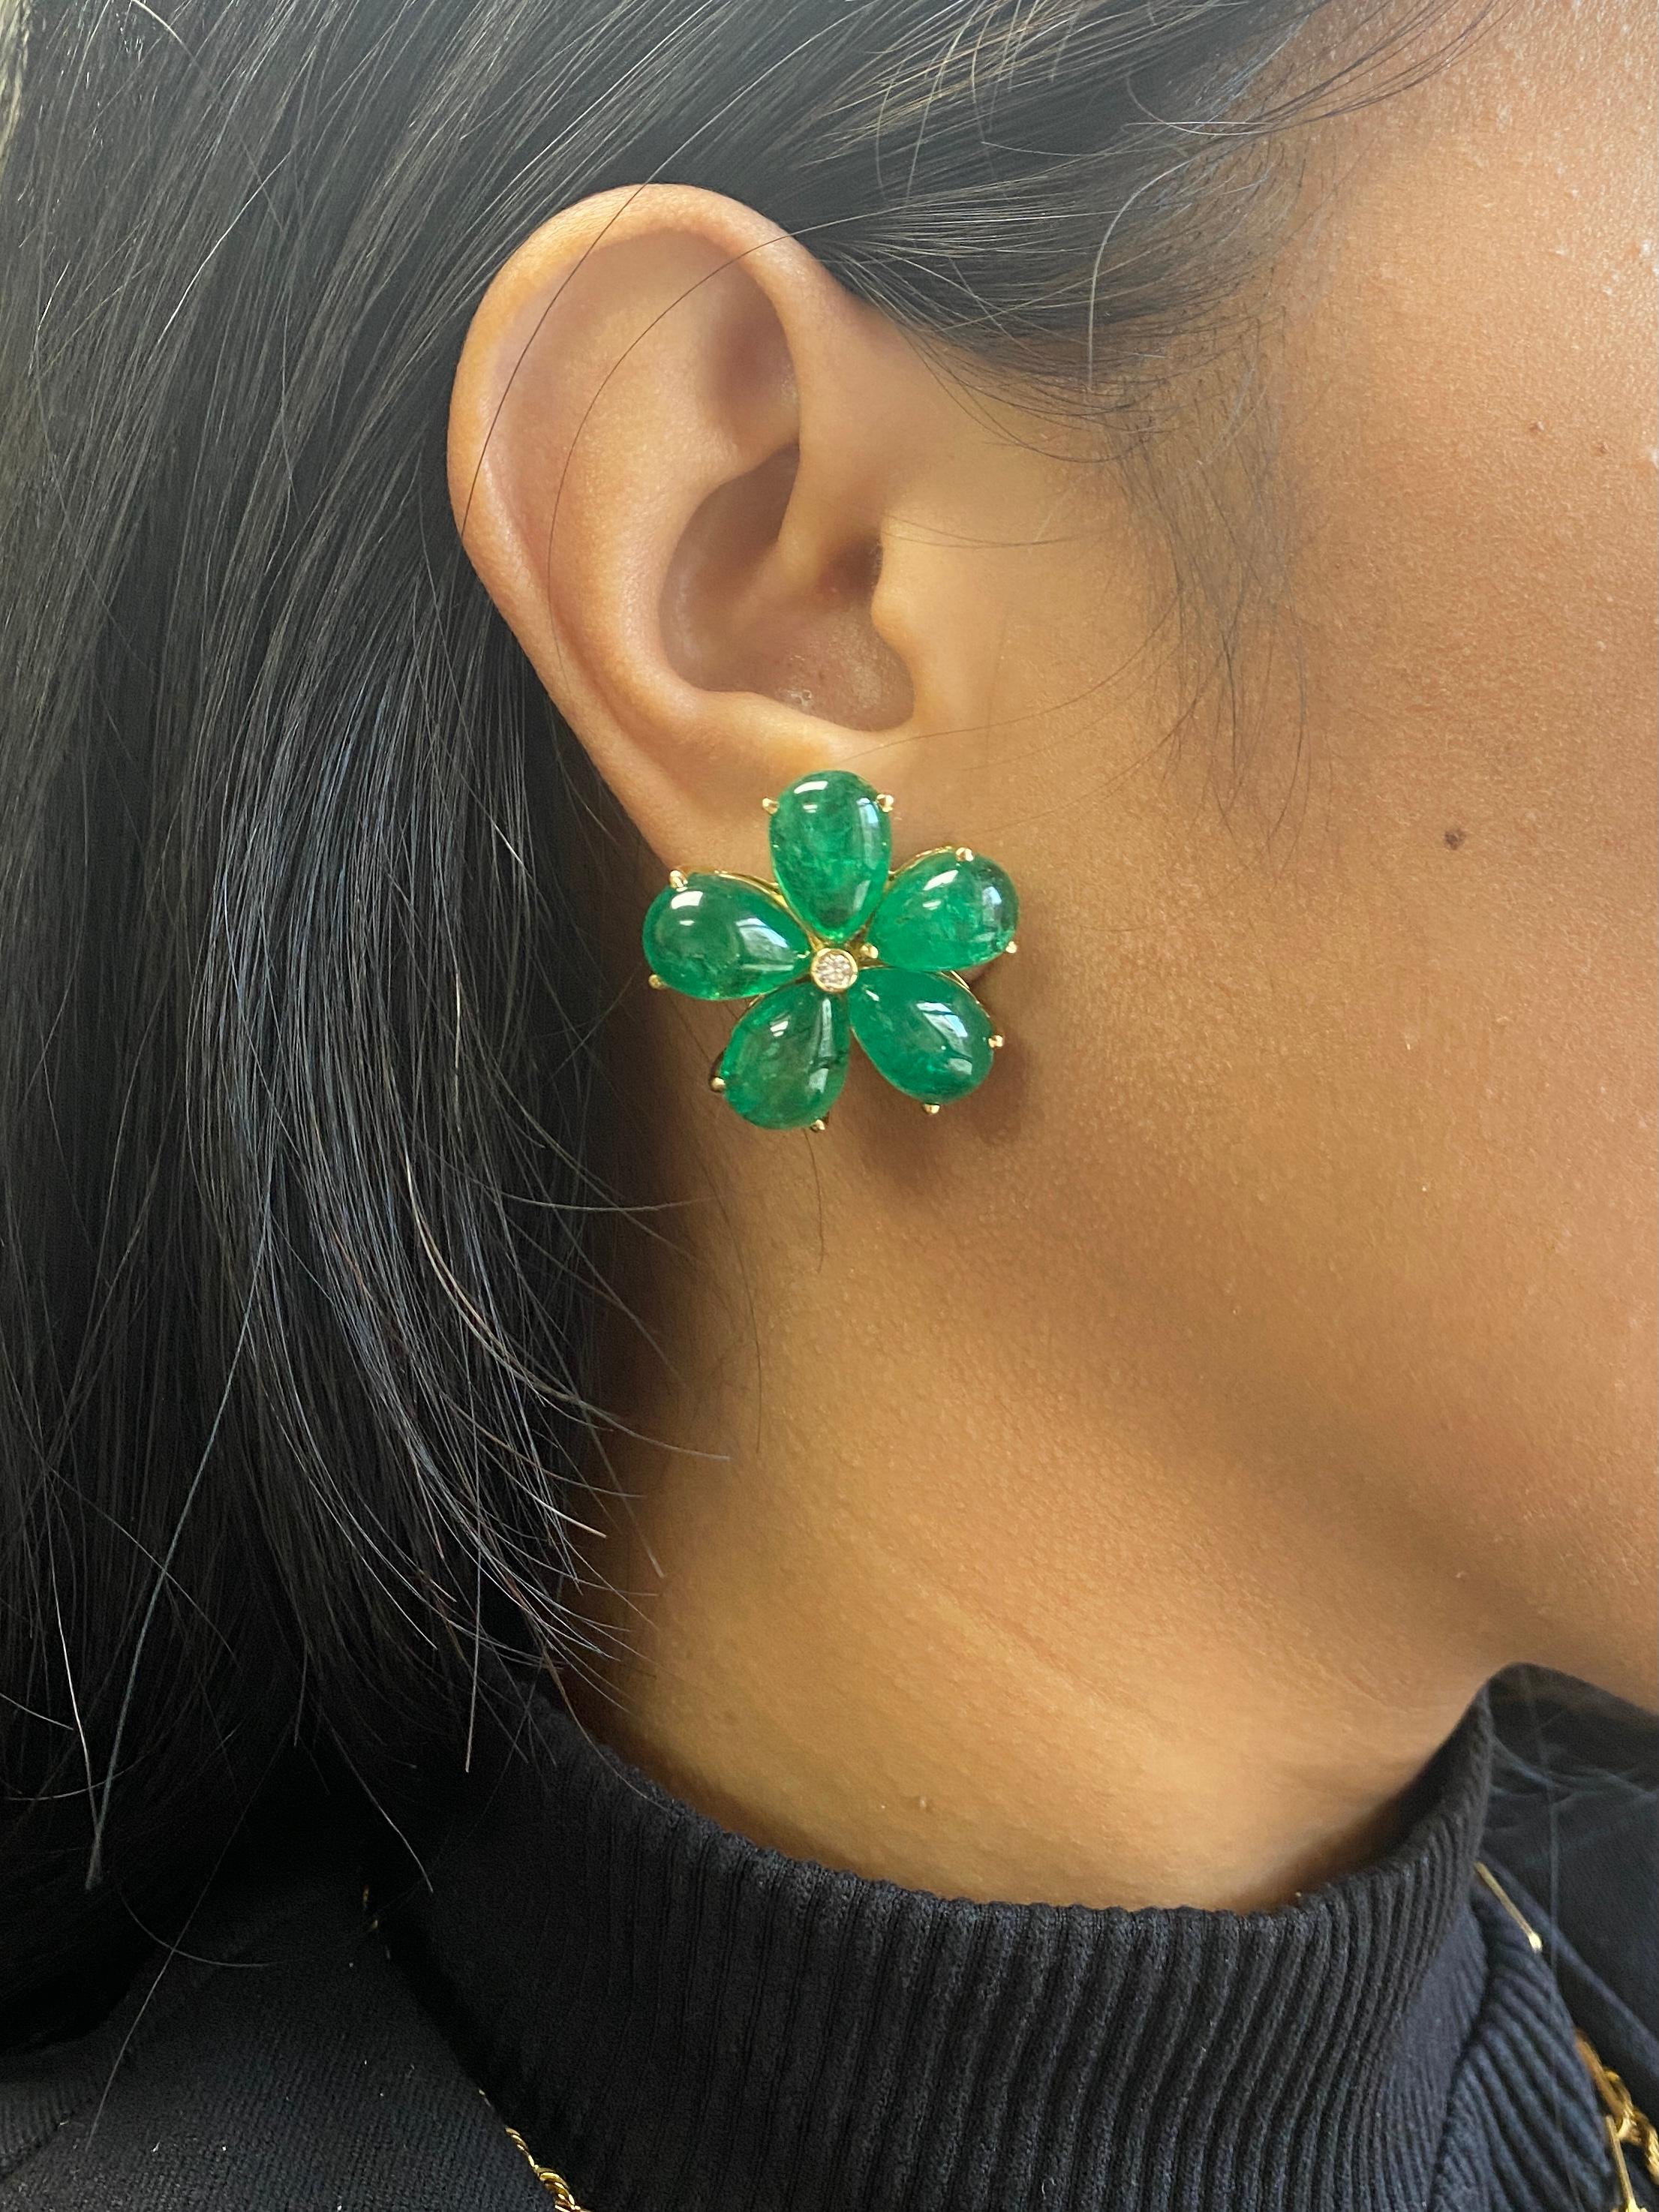 Large Pear Shape Cluster Emerald Stud Earrings with Diamonds in 18K Yellow Gold, from ‘G-One' Collection. This is a wonderful piece to have in your personal collection. If you love emeralds and diamonds, don’t wait longer, this is the one!

*